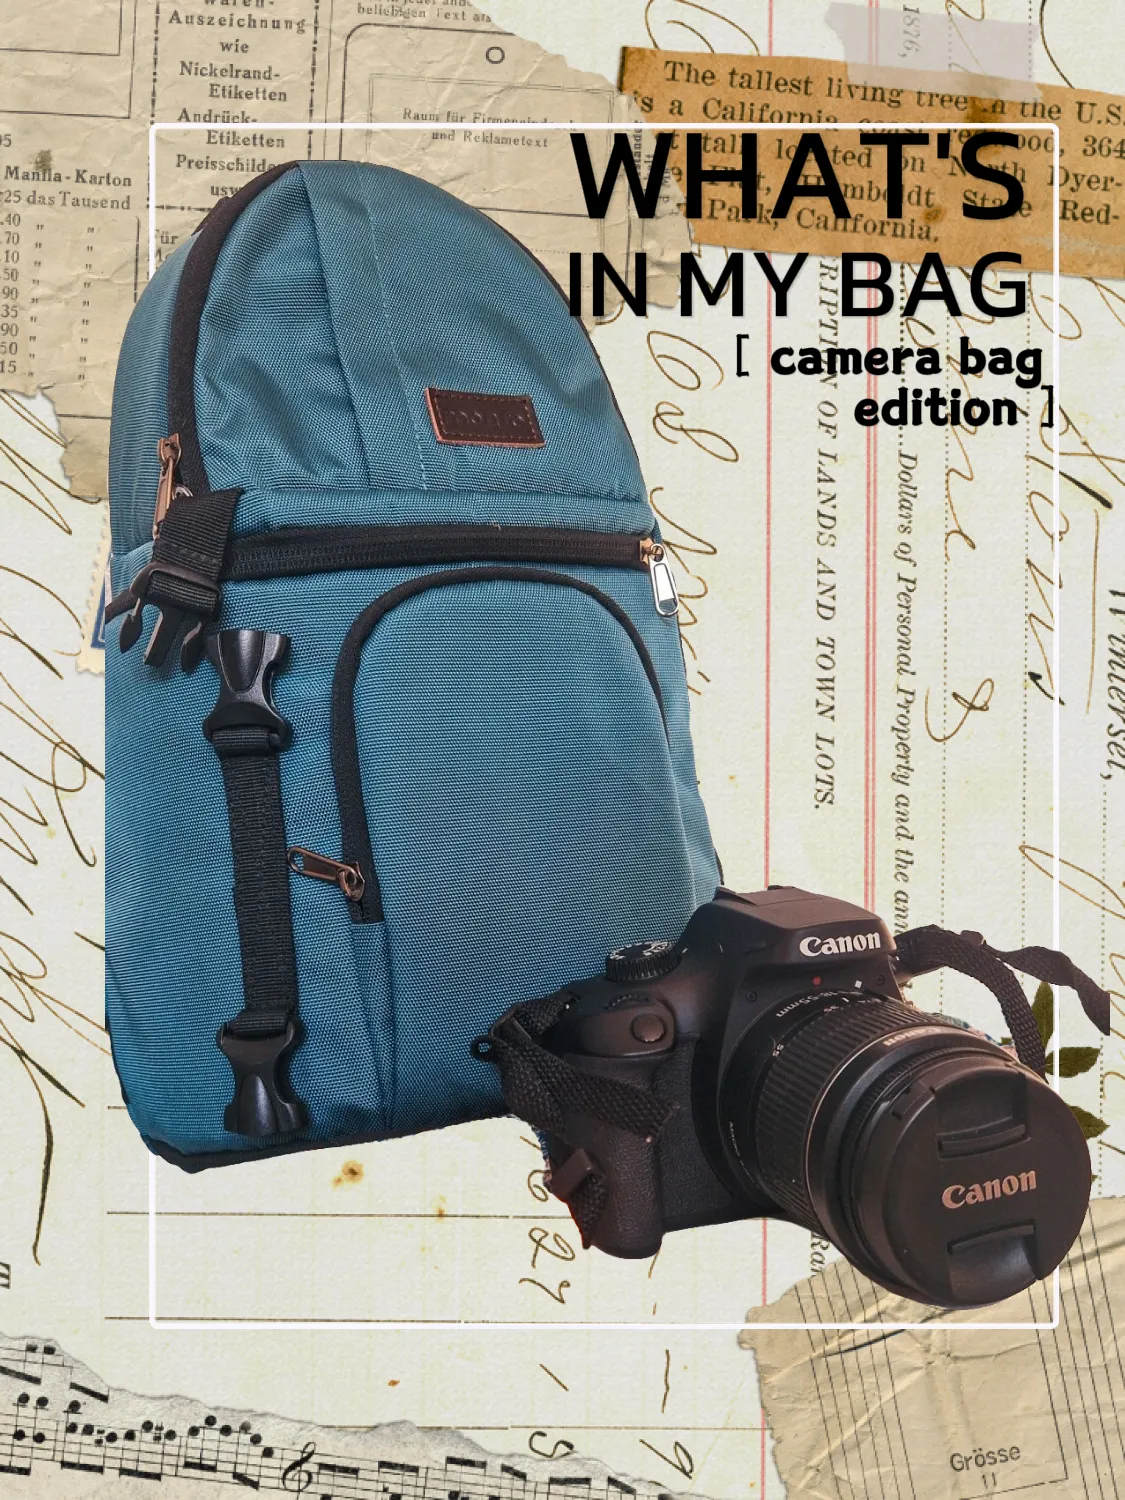 Must Camera Bag - LegrandShops - More May Bags in the Wild from